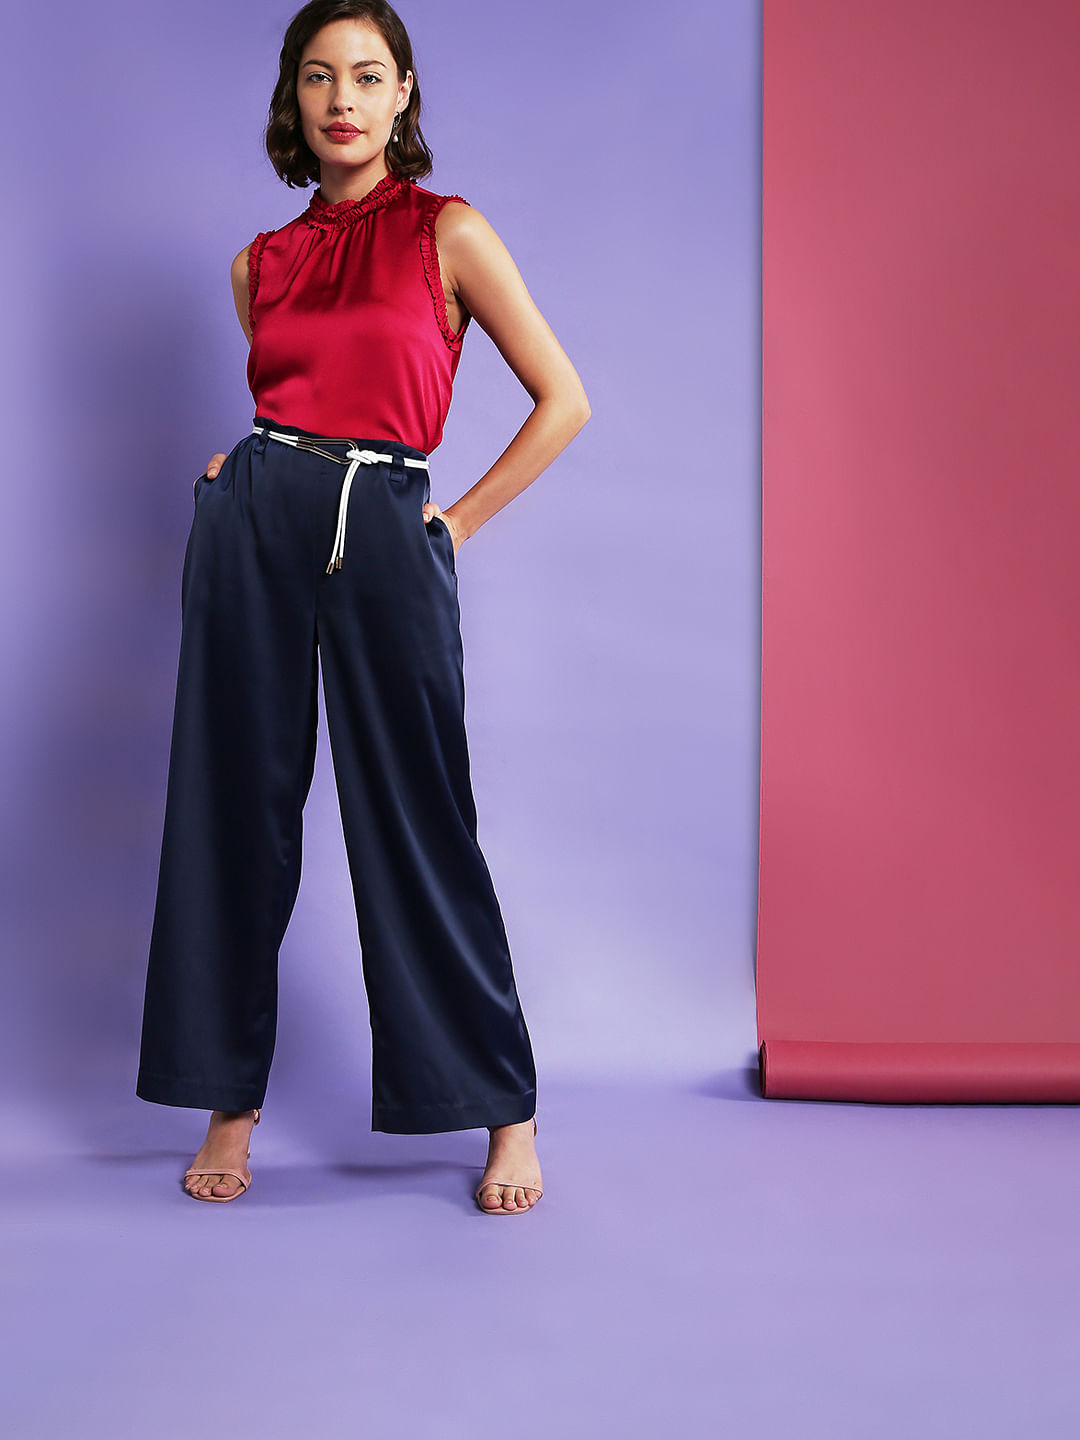 Women's Pleated High-Waisted Pants | Nordstrom